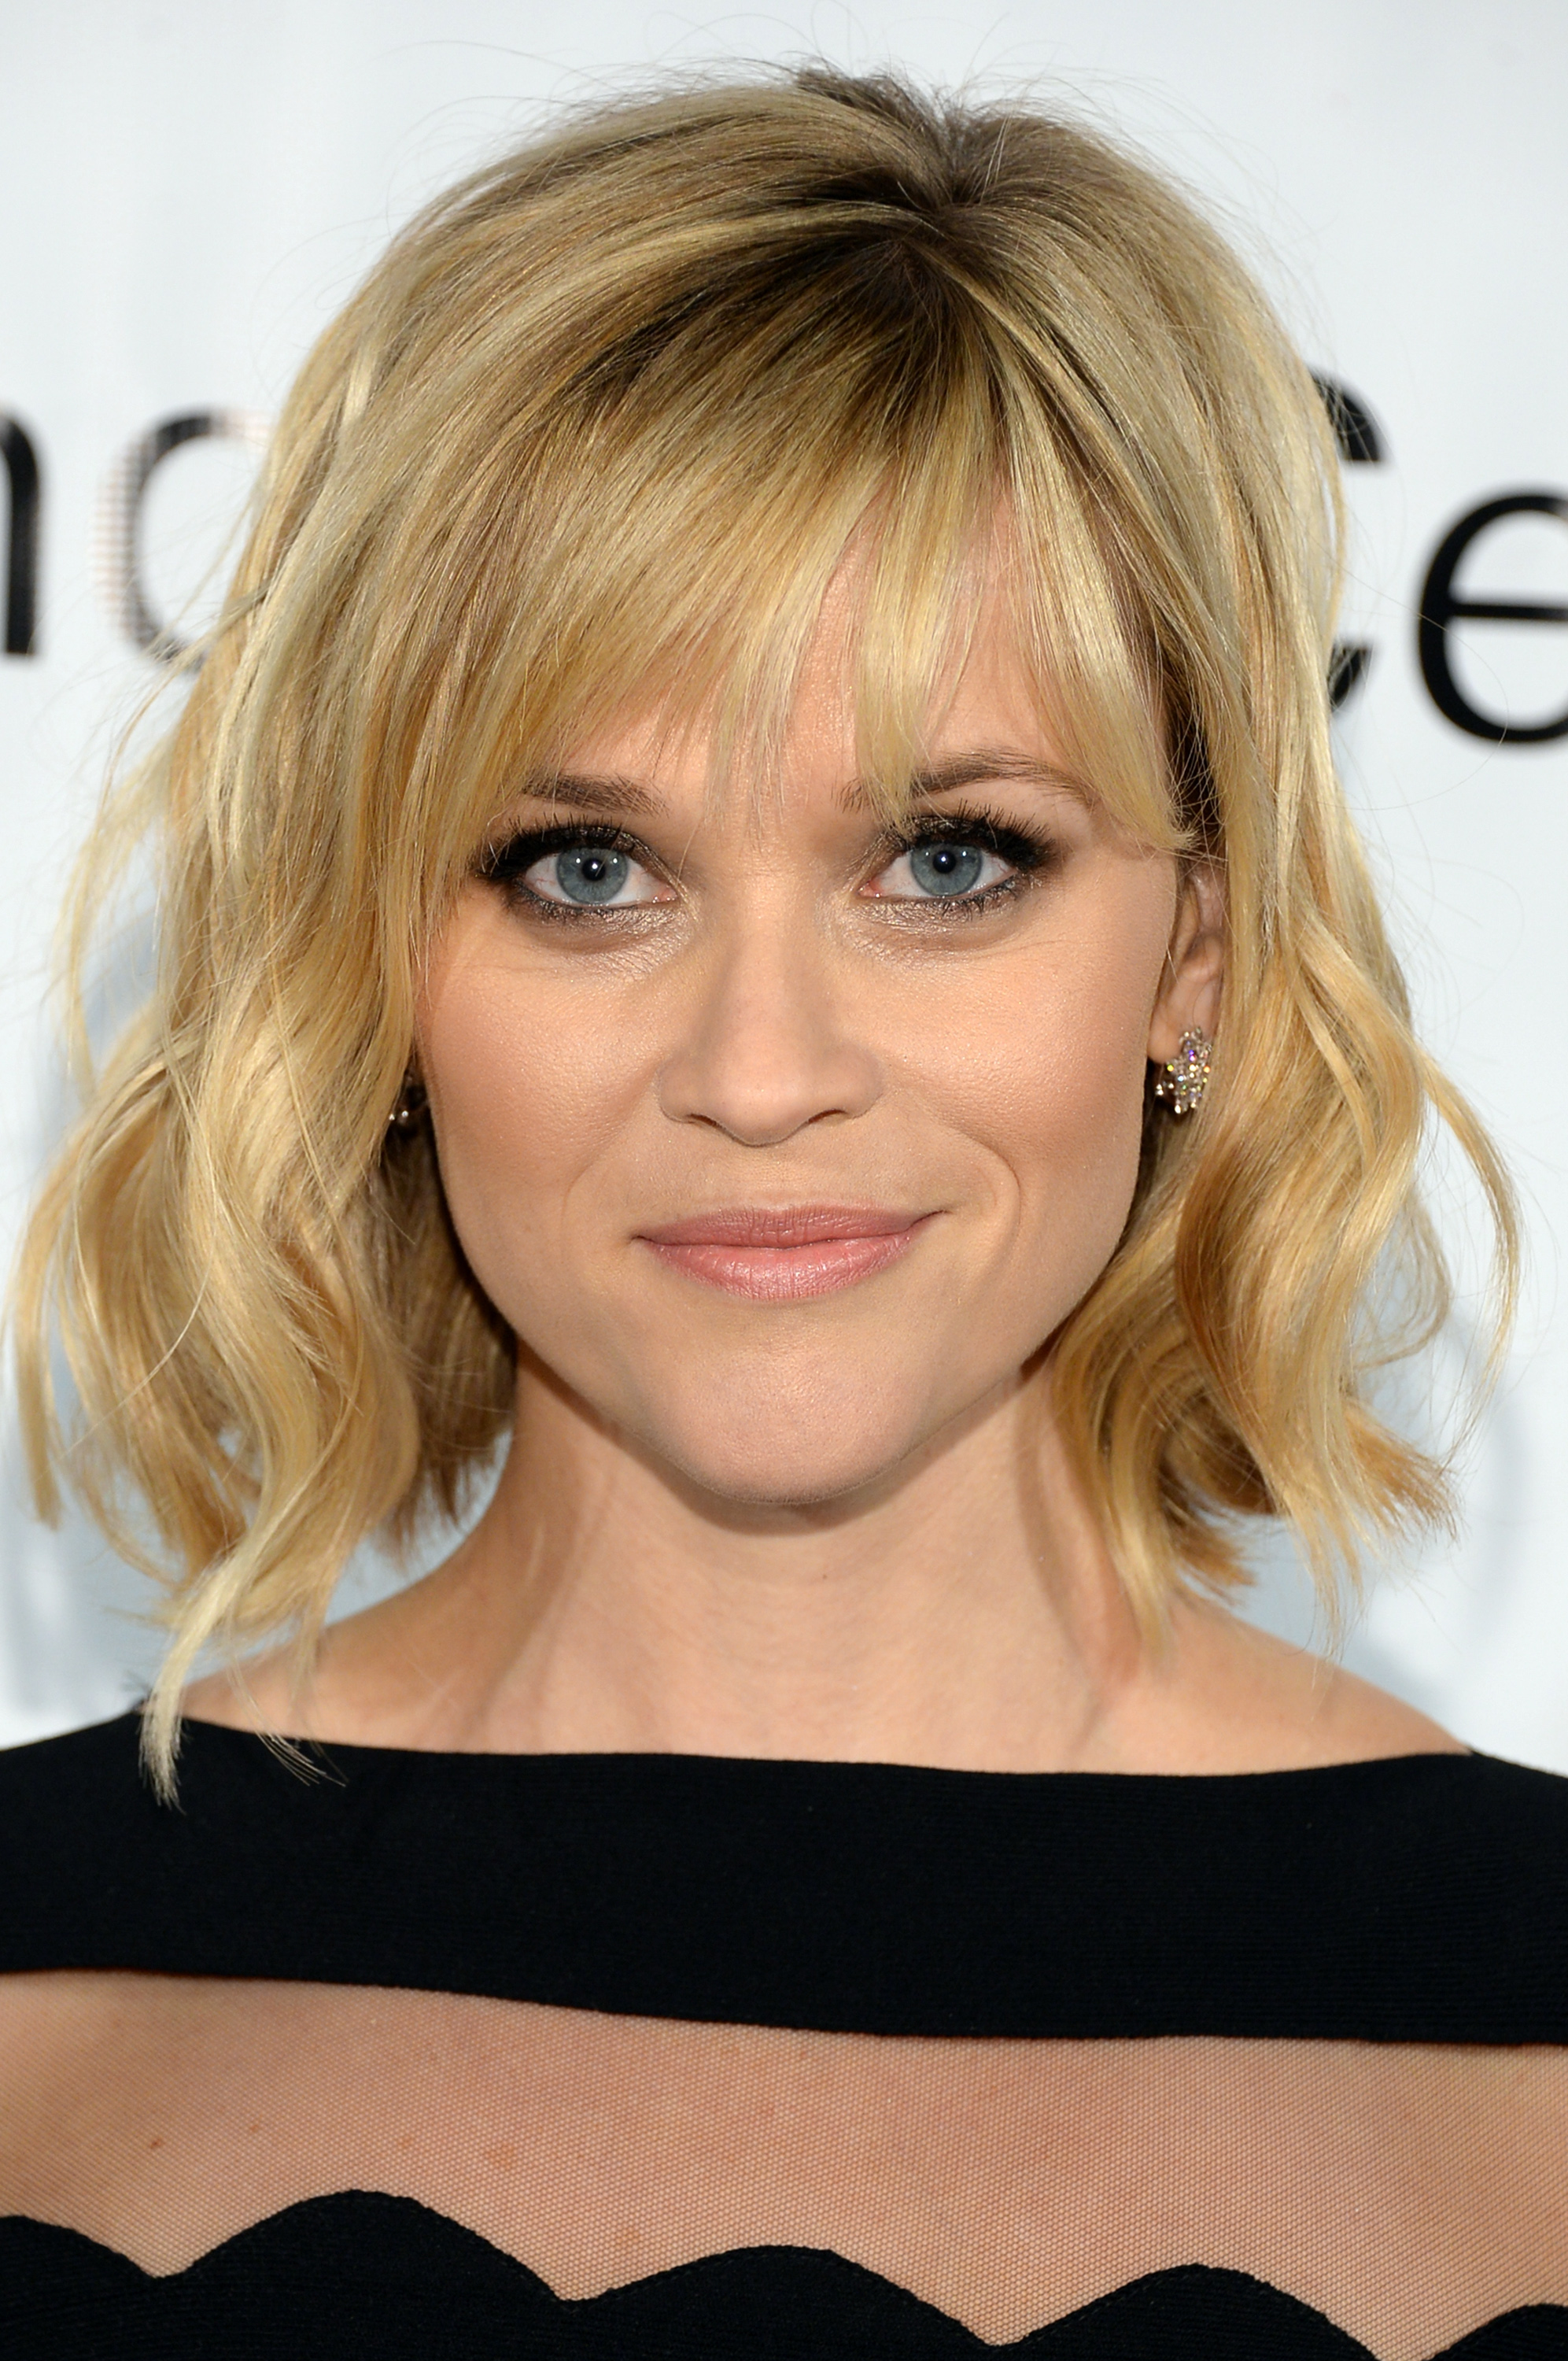 Actress Reese Witherspoon at Alice Tully Hall on February 10, 2014 in New York City. (Theo Wargo—Getty Images)